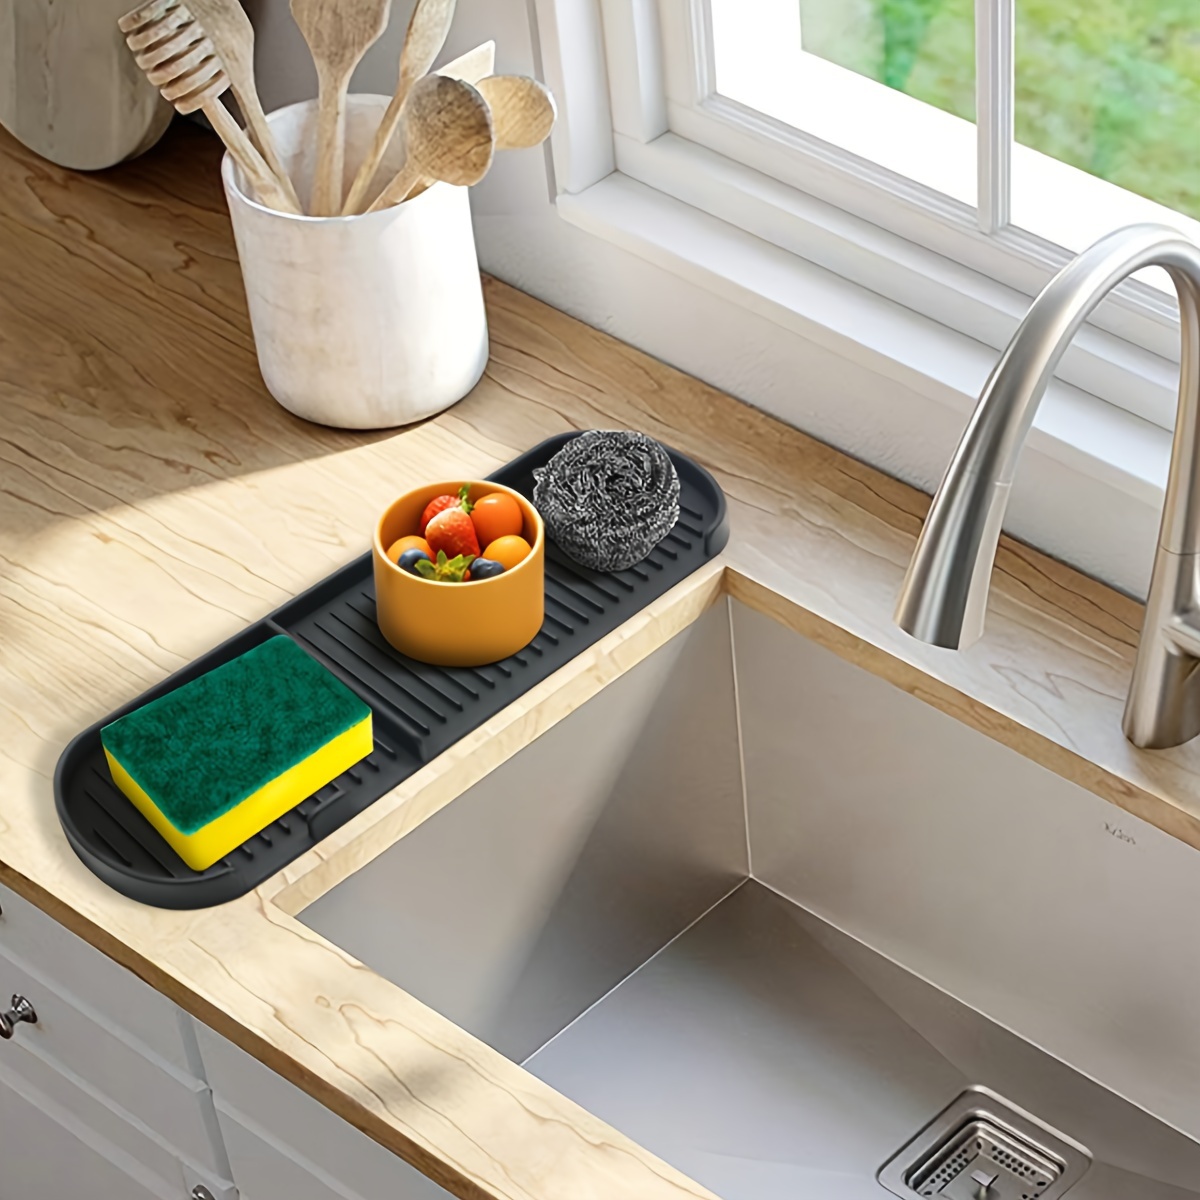 Sink Silicone Tray With drain Soap Sponge Storage Holder